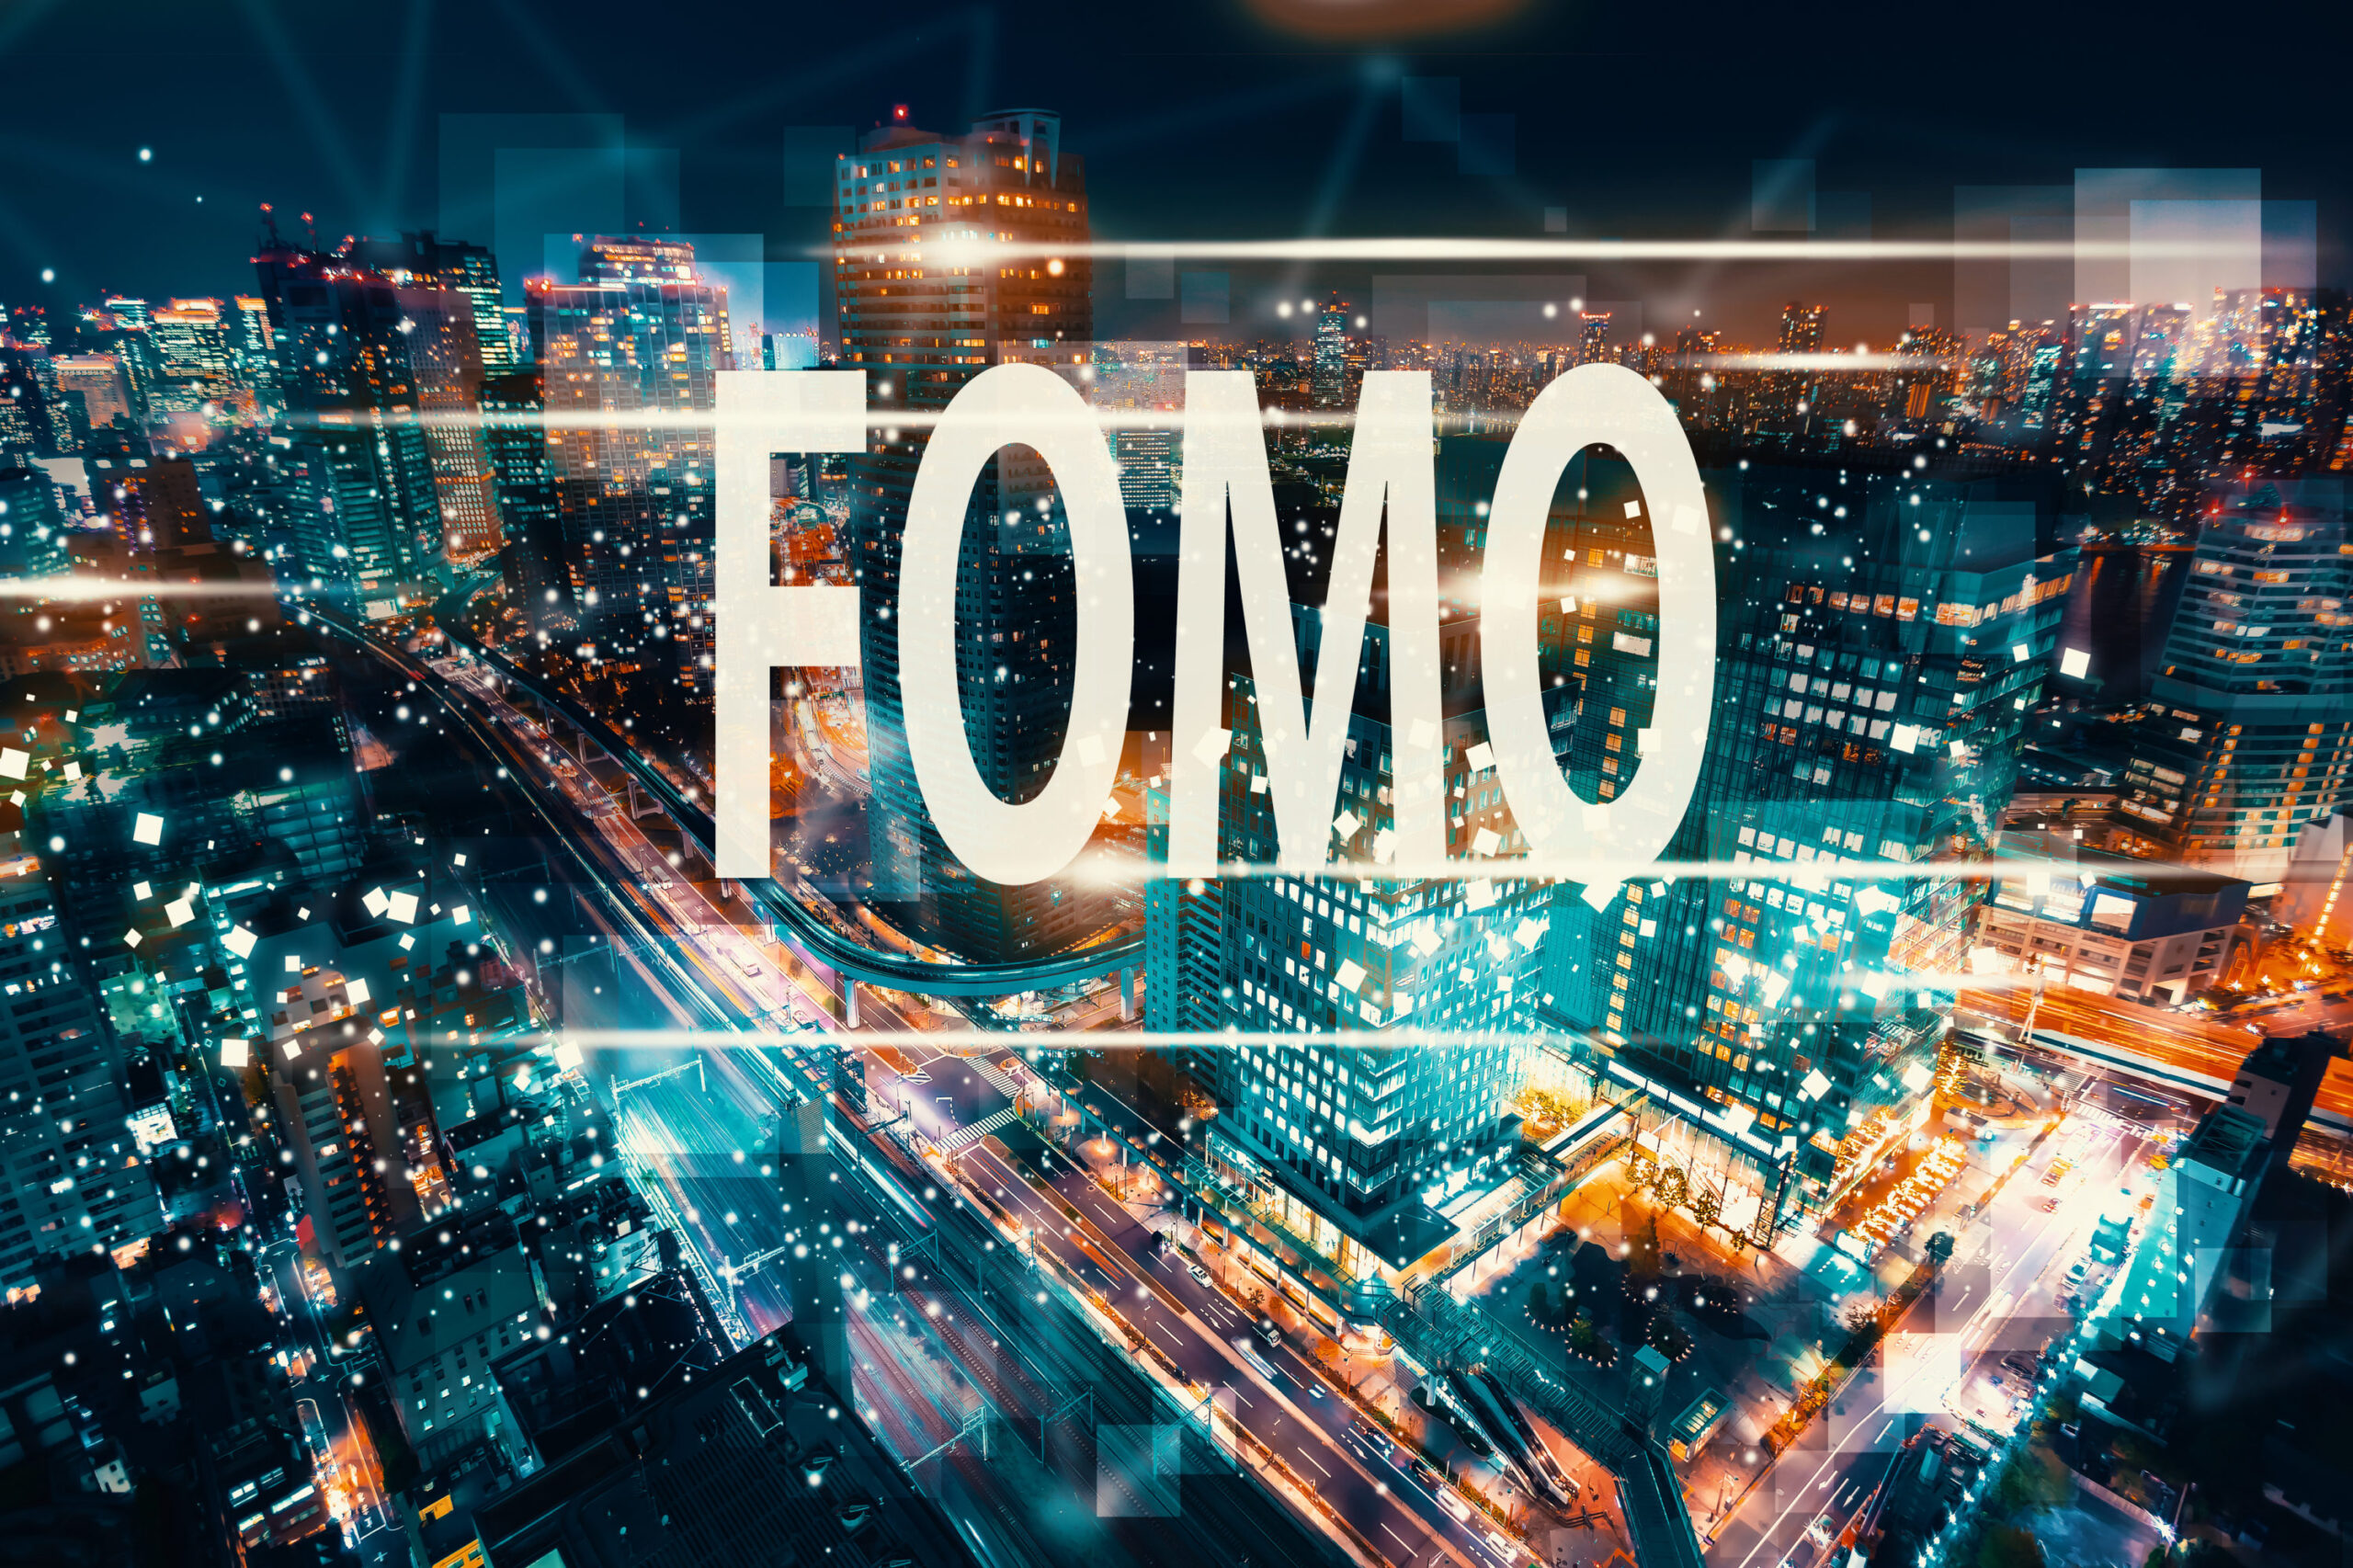 Minimal vs FOMO: what are young people really up to with their money?